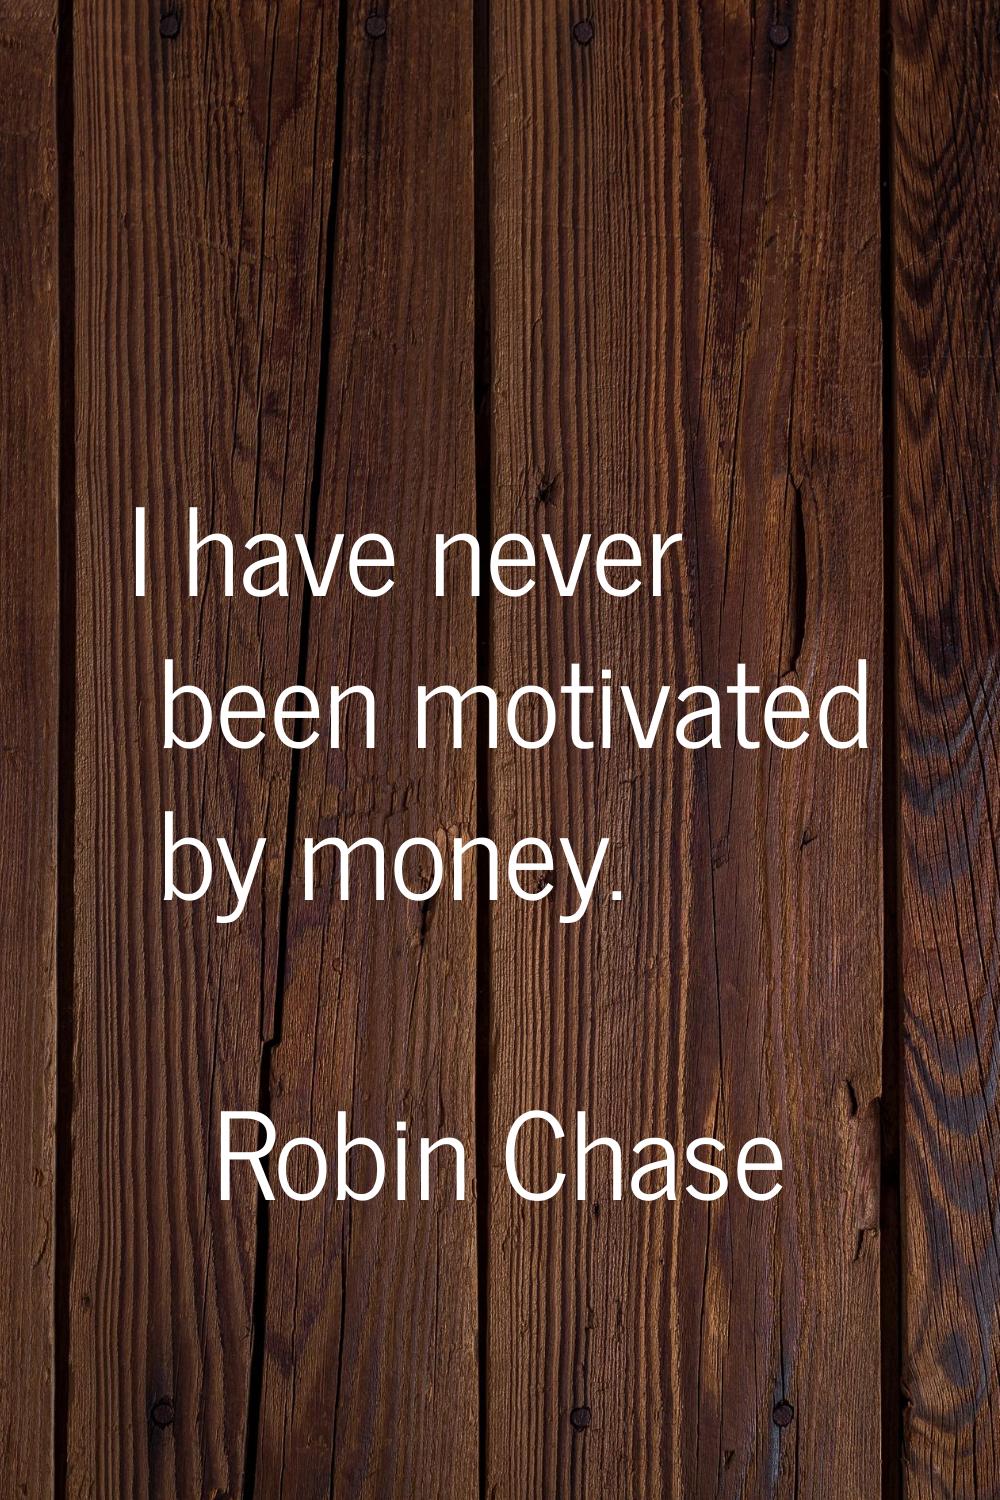 I have never been motivated by money.